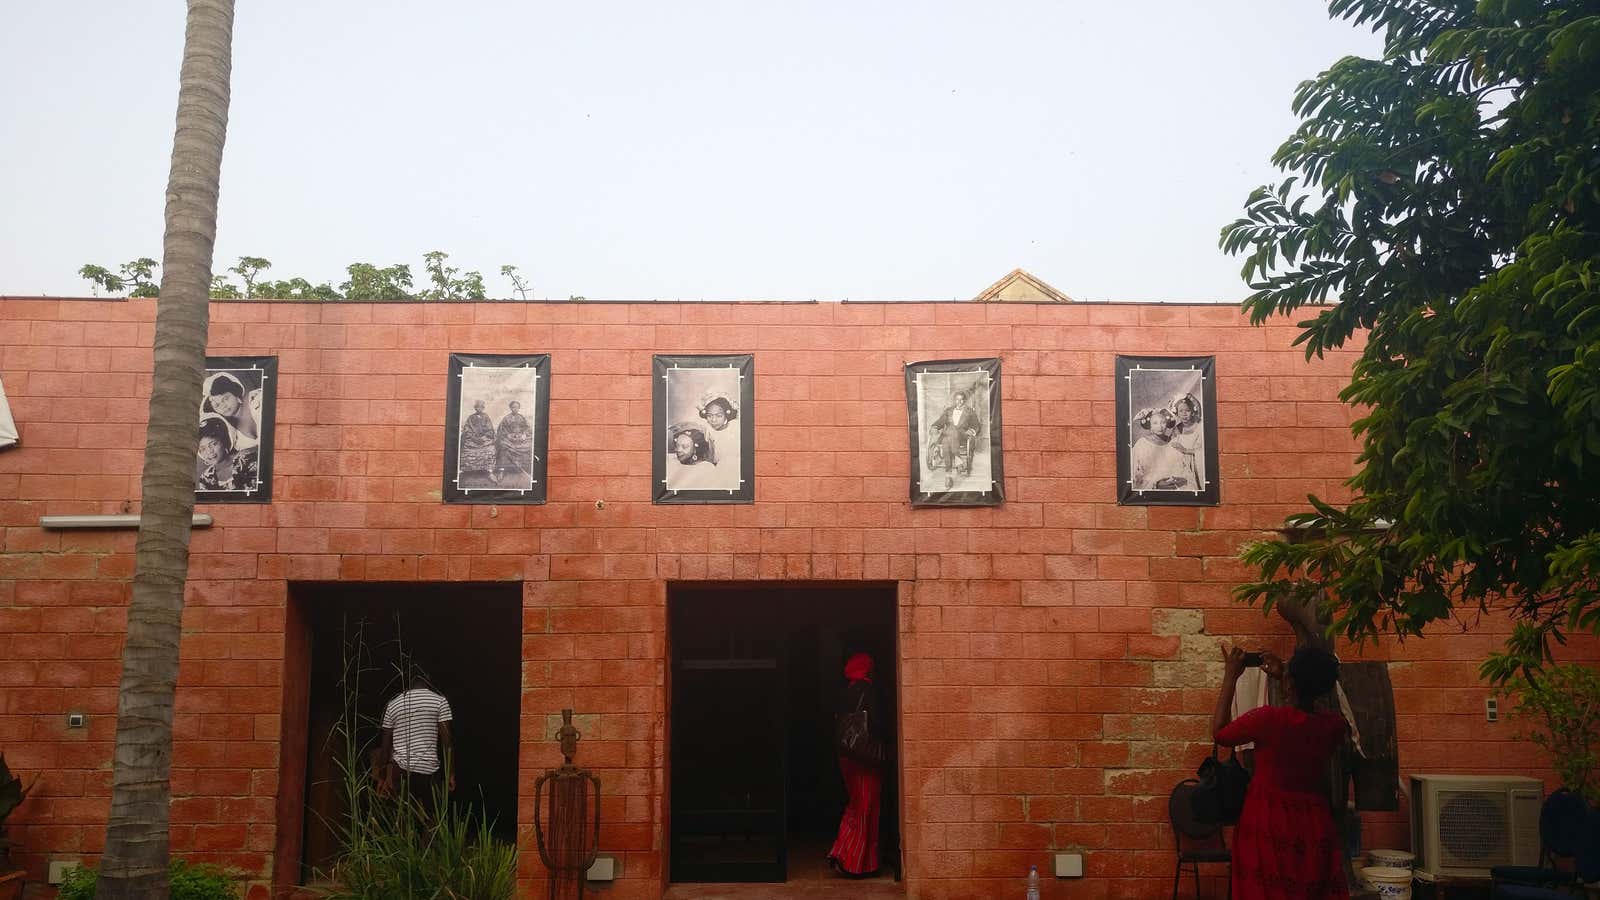 The collection of Senegalese businessman Amadou Diaw, pictured here at his house, highlights the Senegal’s rich and deep photography tradition.